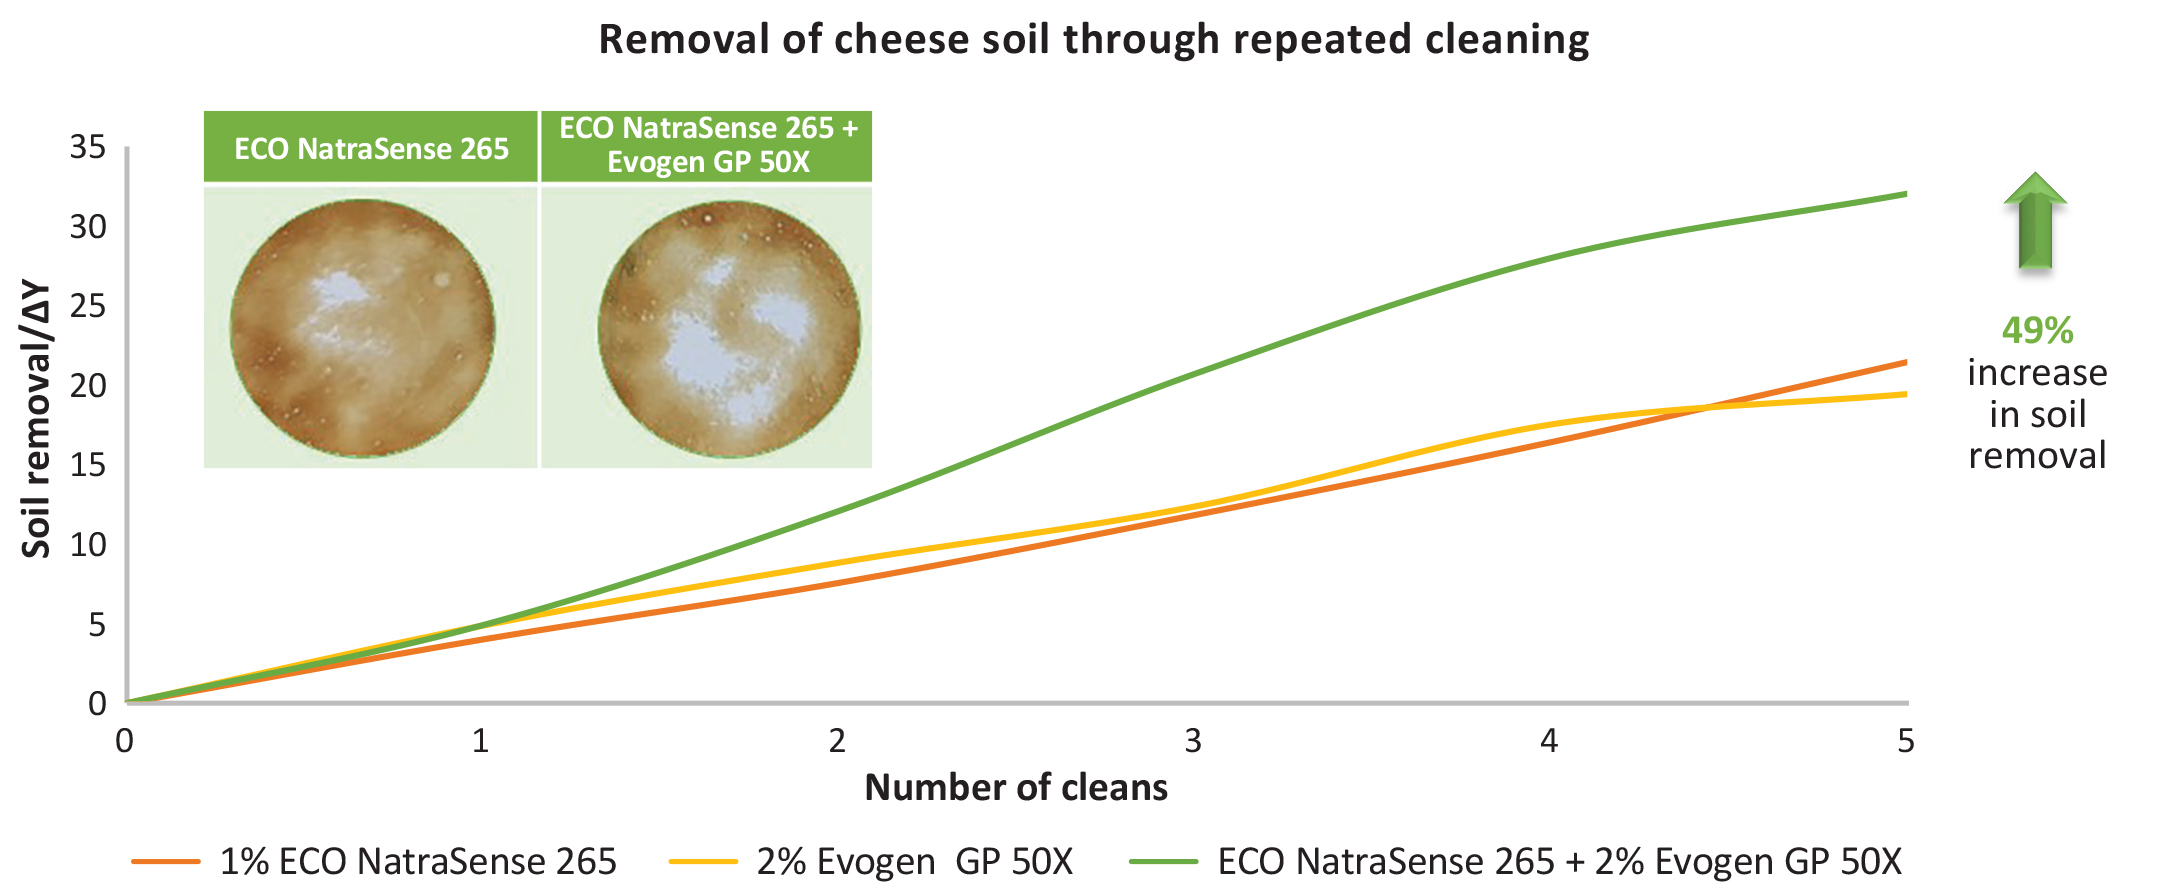 Removal of cheese soil through repeated cleaning